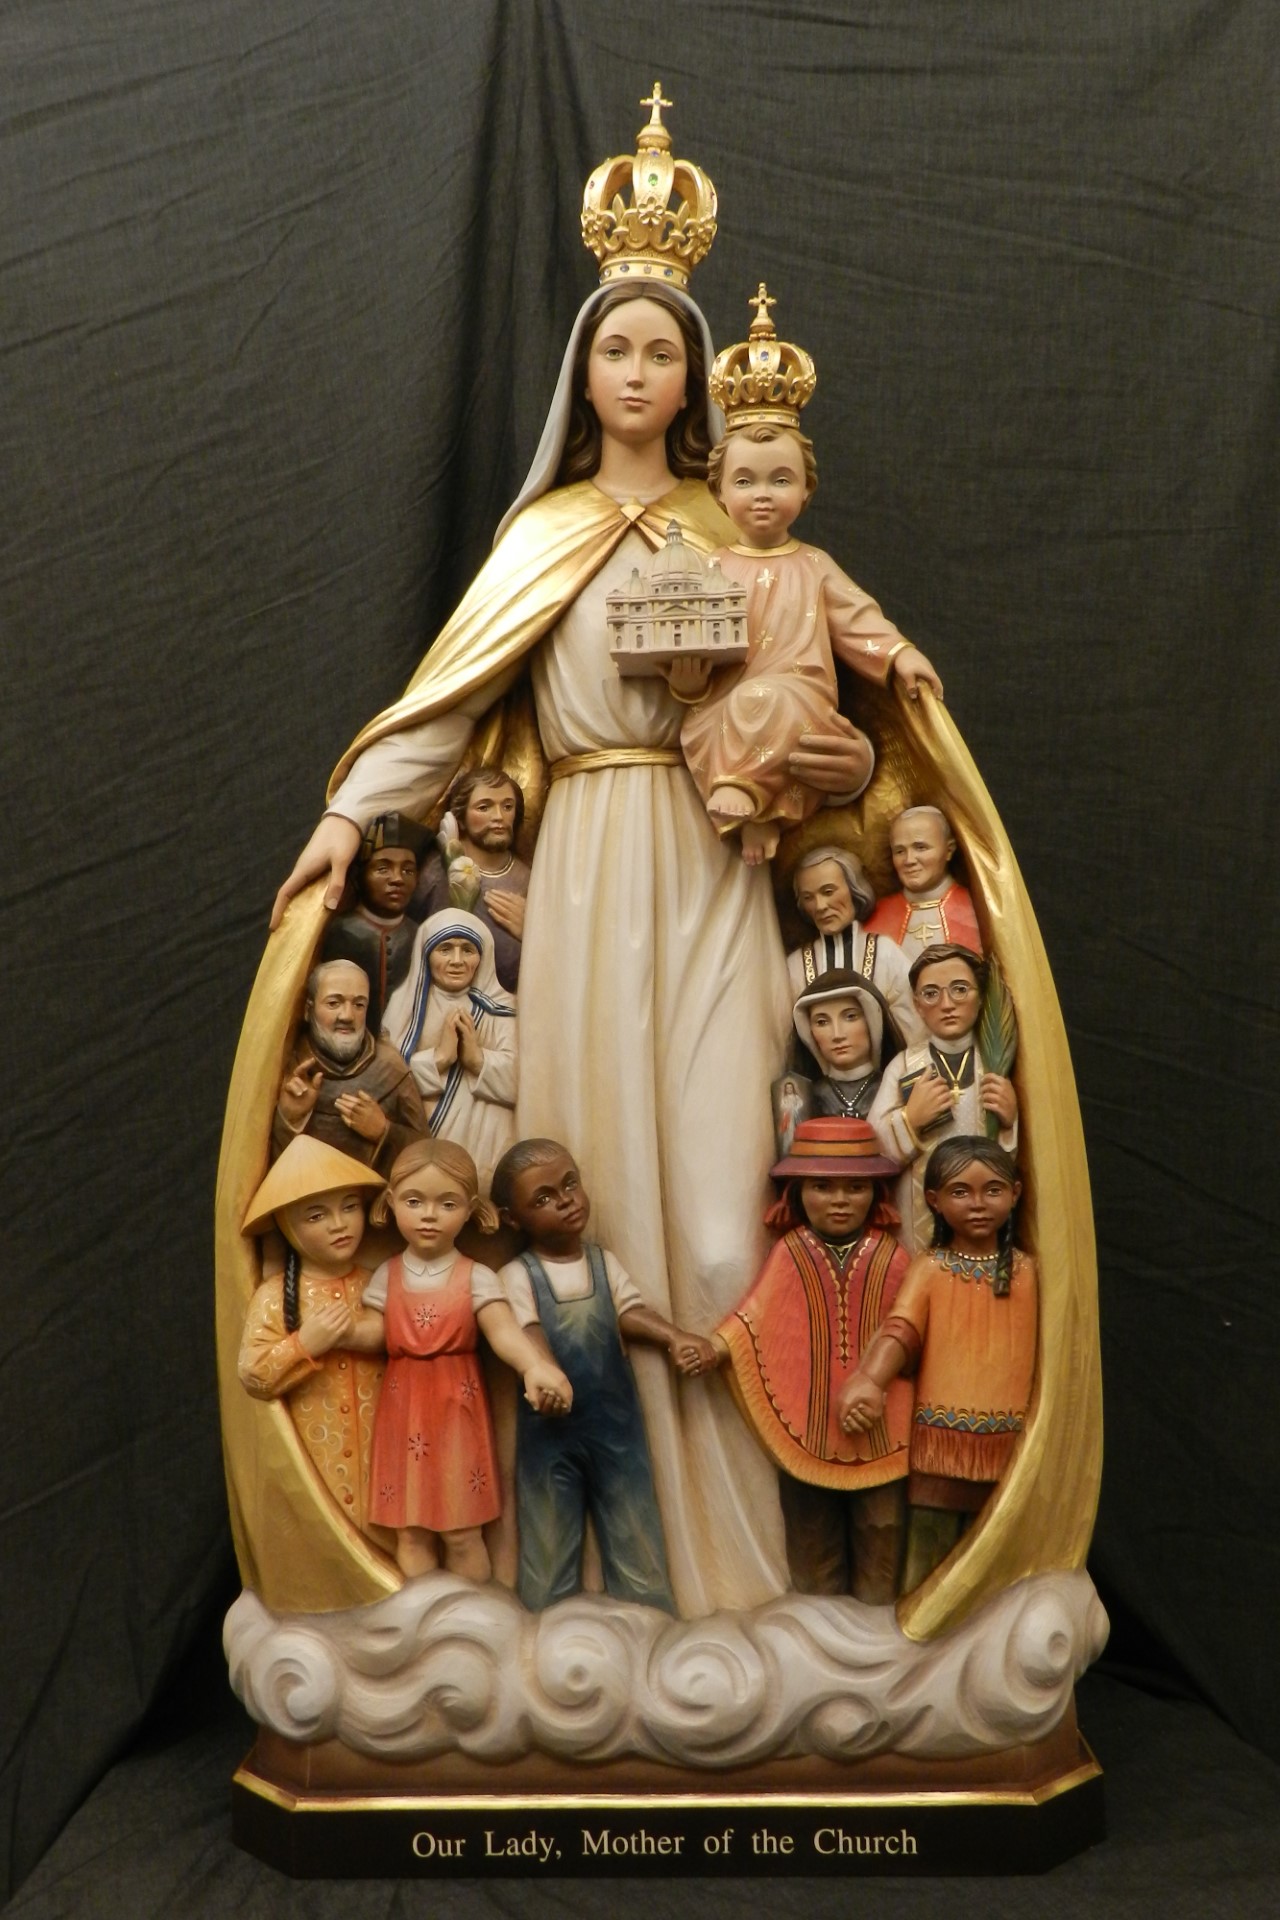 Our Lady, Mother of the Church